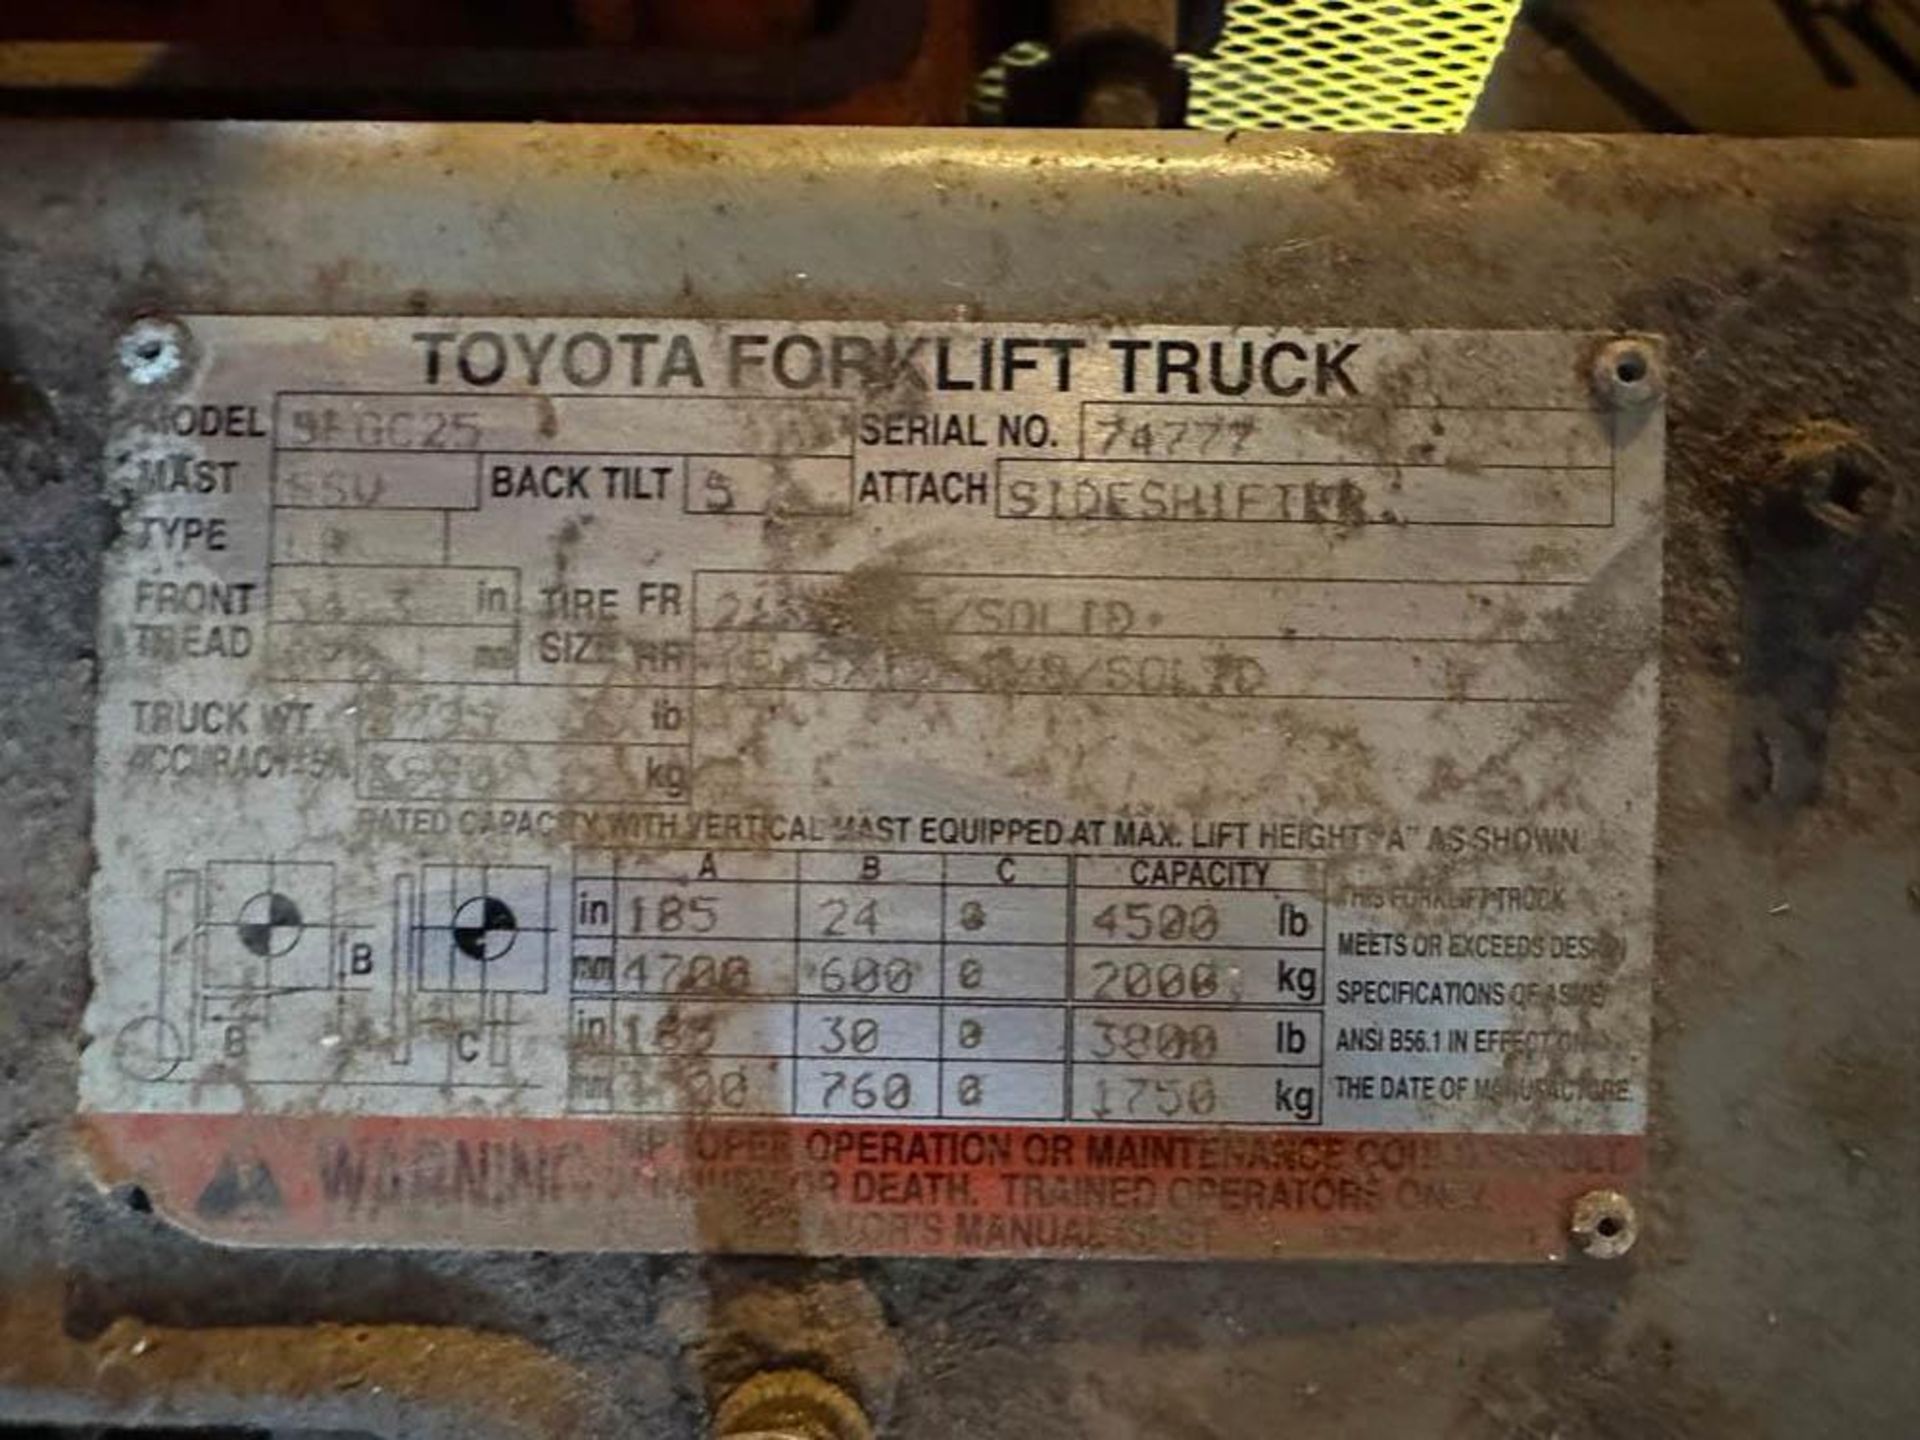 Toyota 4,500 LB Capacity Propane Fork Truck, Model: 5FGC25, S/N: 74777 with Side Shift, 185 " Max - Image 2 of 2